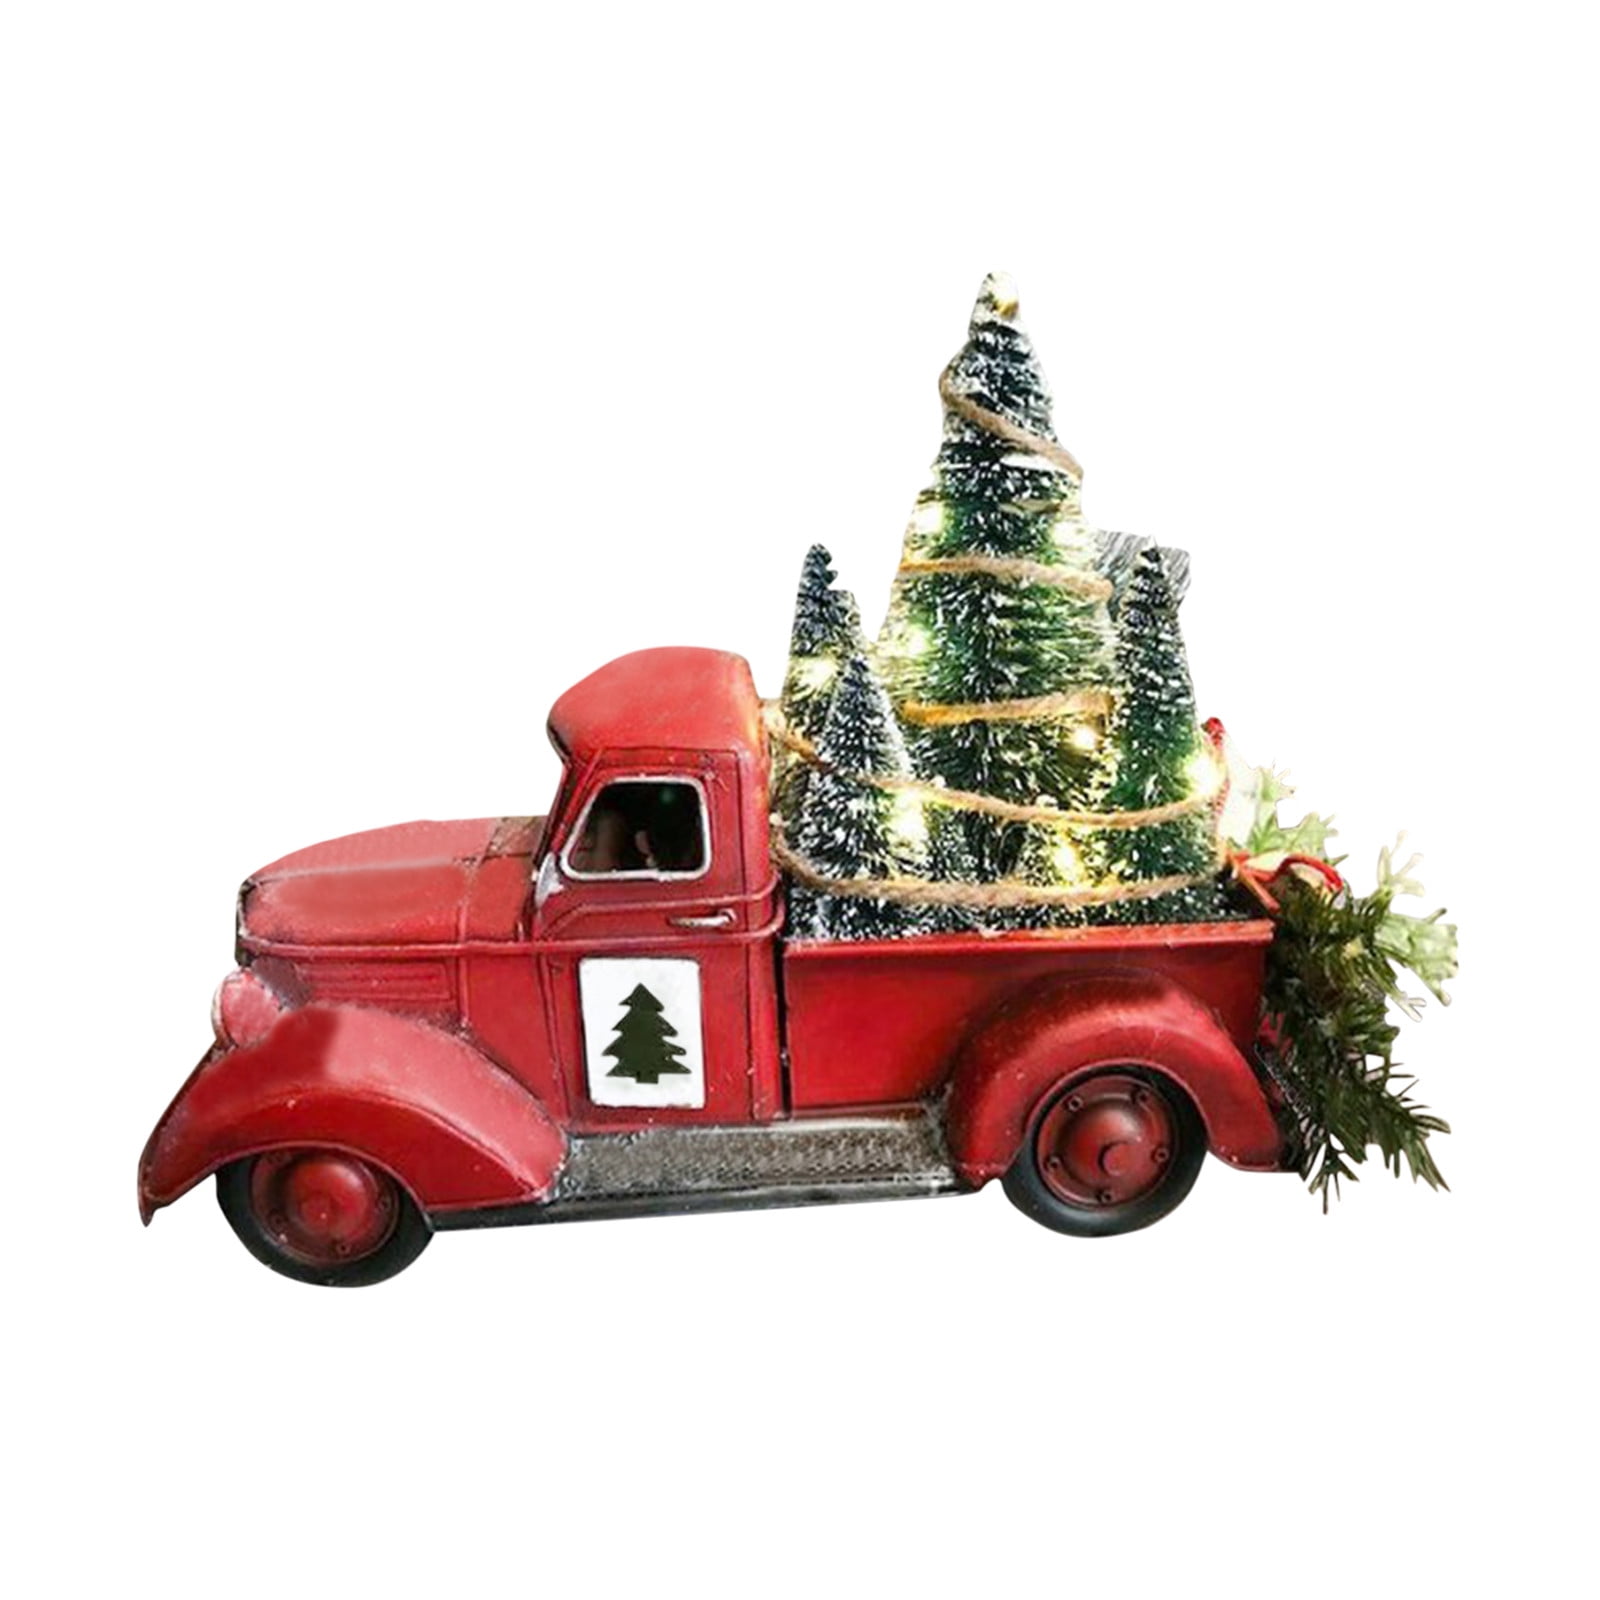 fast ship! Vintage Red Truck w/Tree Wood "Merry Christmas" Wall Hang Decor New 